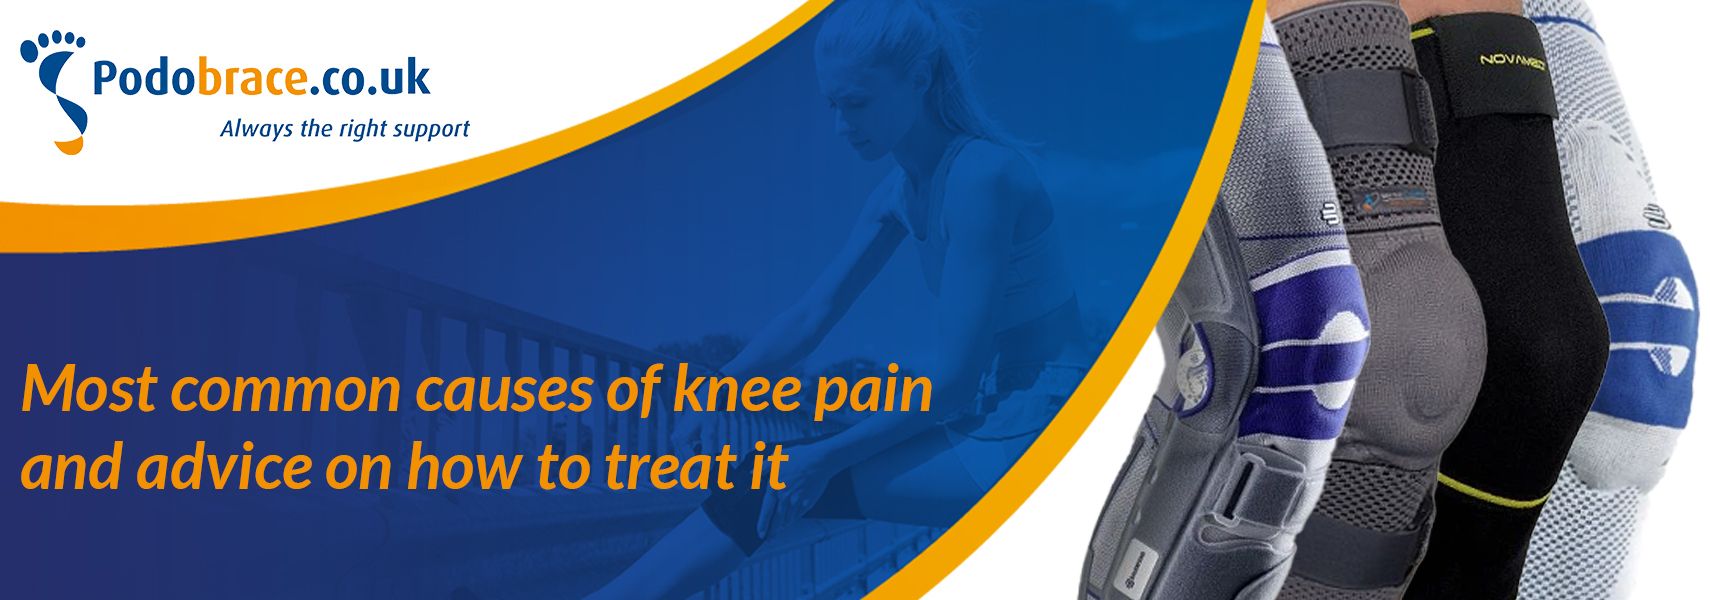 Most common causes of knee pain and advice on how to treat it